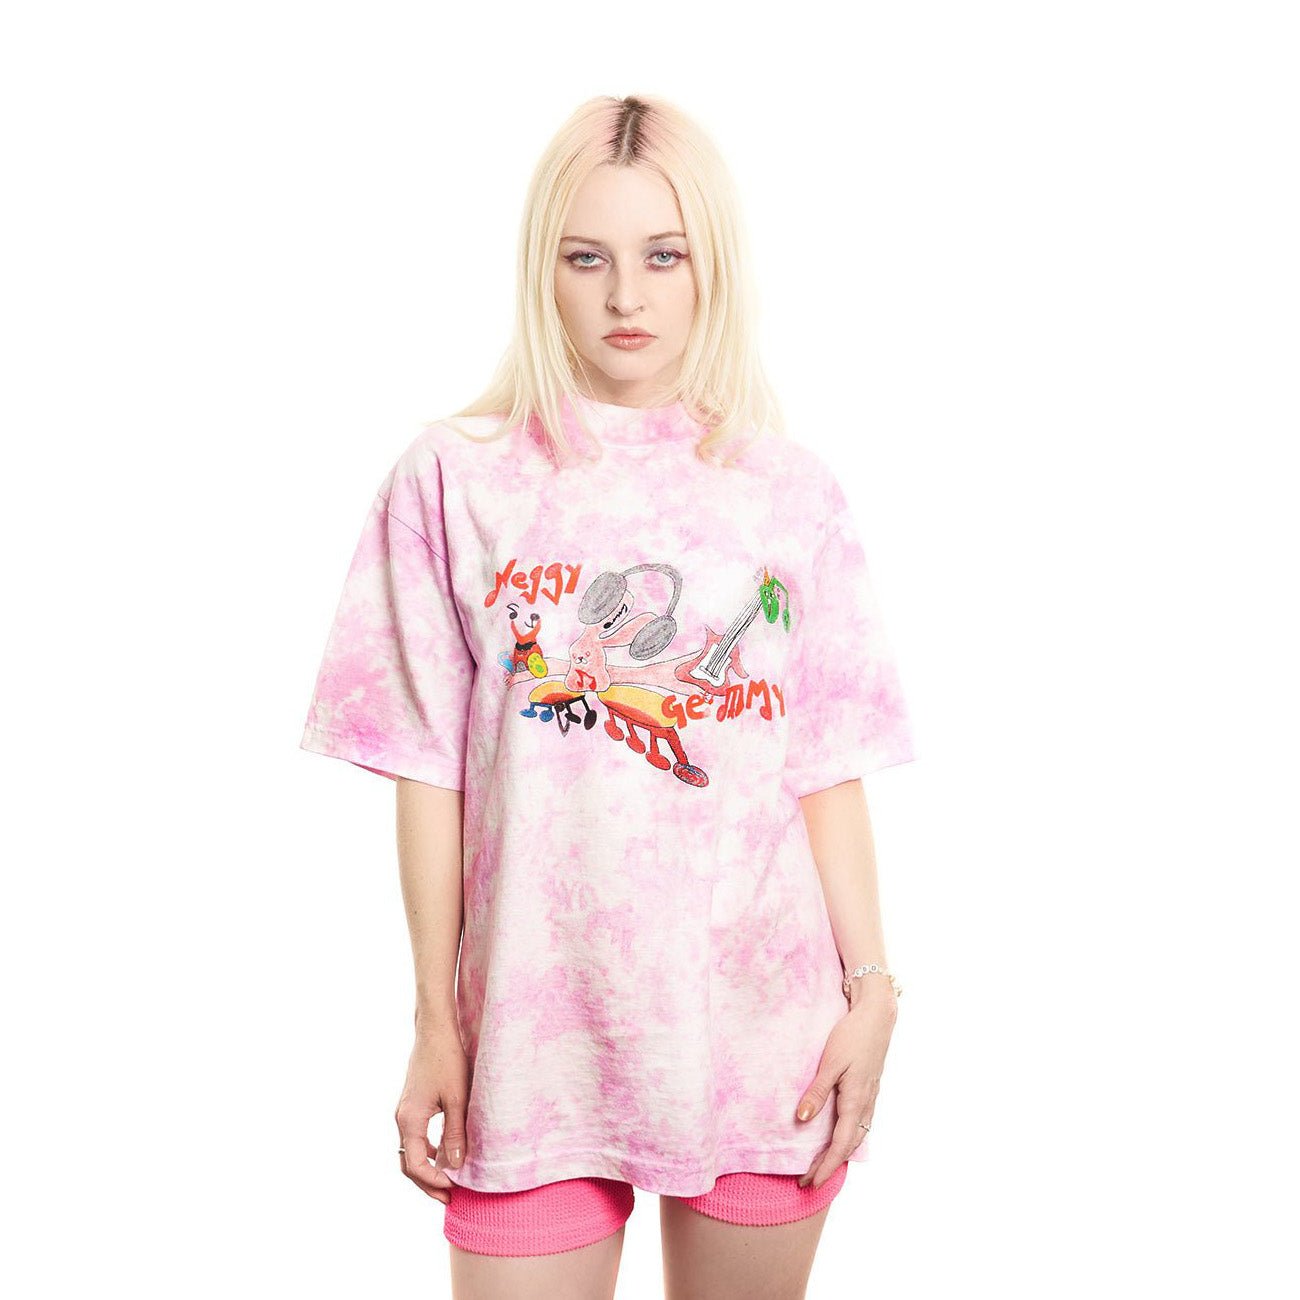 Neggy Gemmy - Pink Tie Dye T-Shirt - 100% Electronica Official Store (Photo 1)